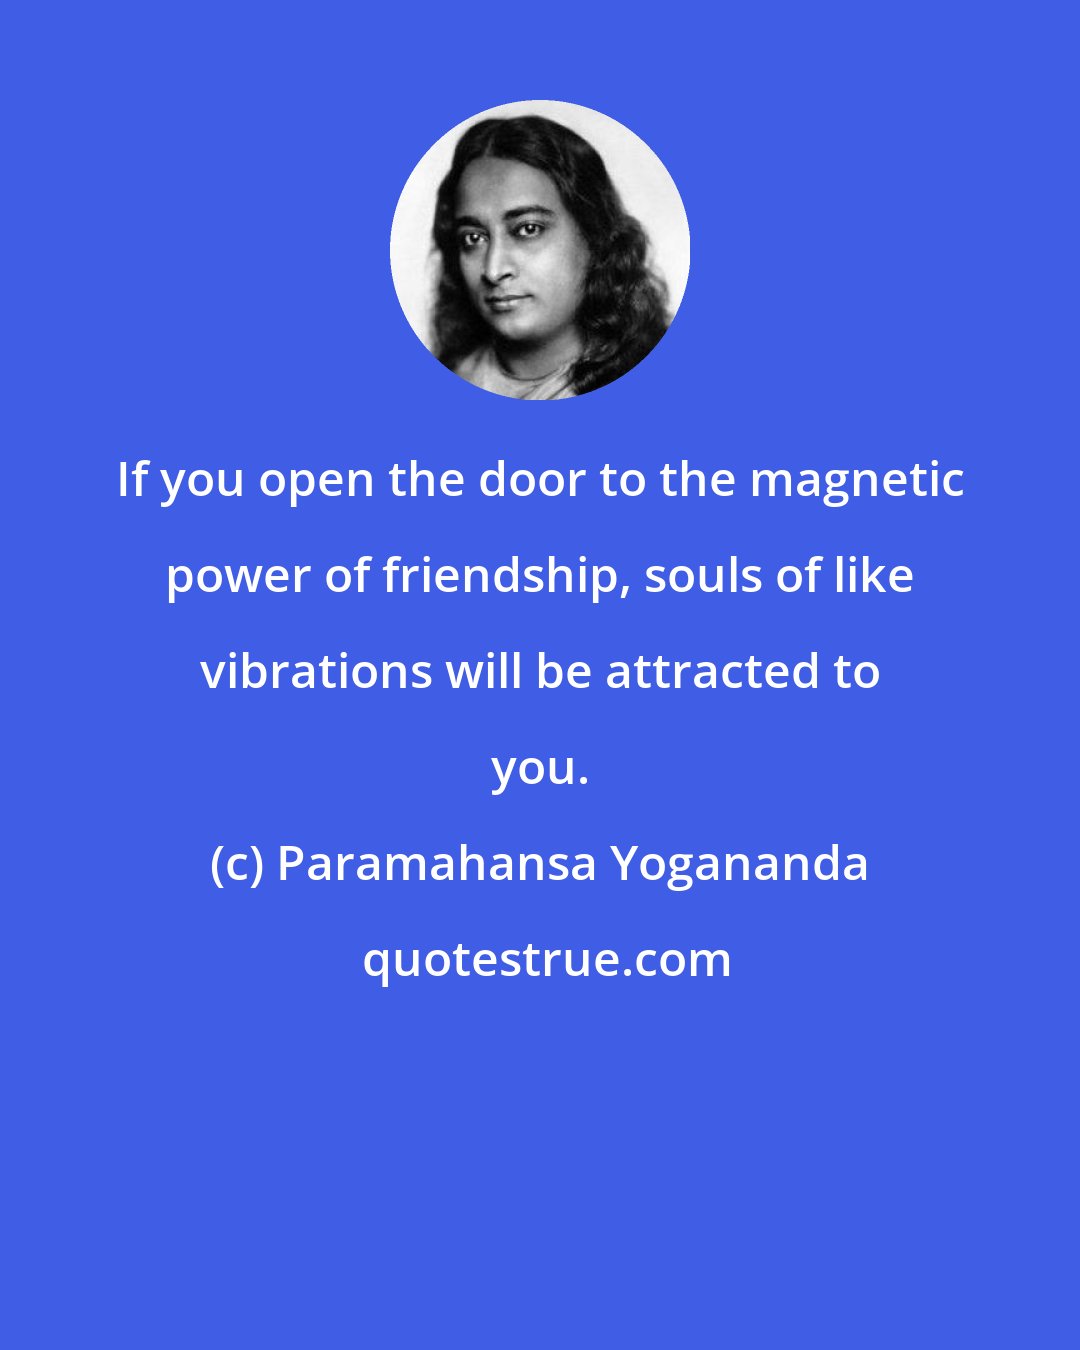 Paramahansa Yogananda: If you open the door to the magnetic power of friendship, souls of like vibrations will be attracted to you.